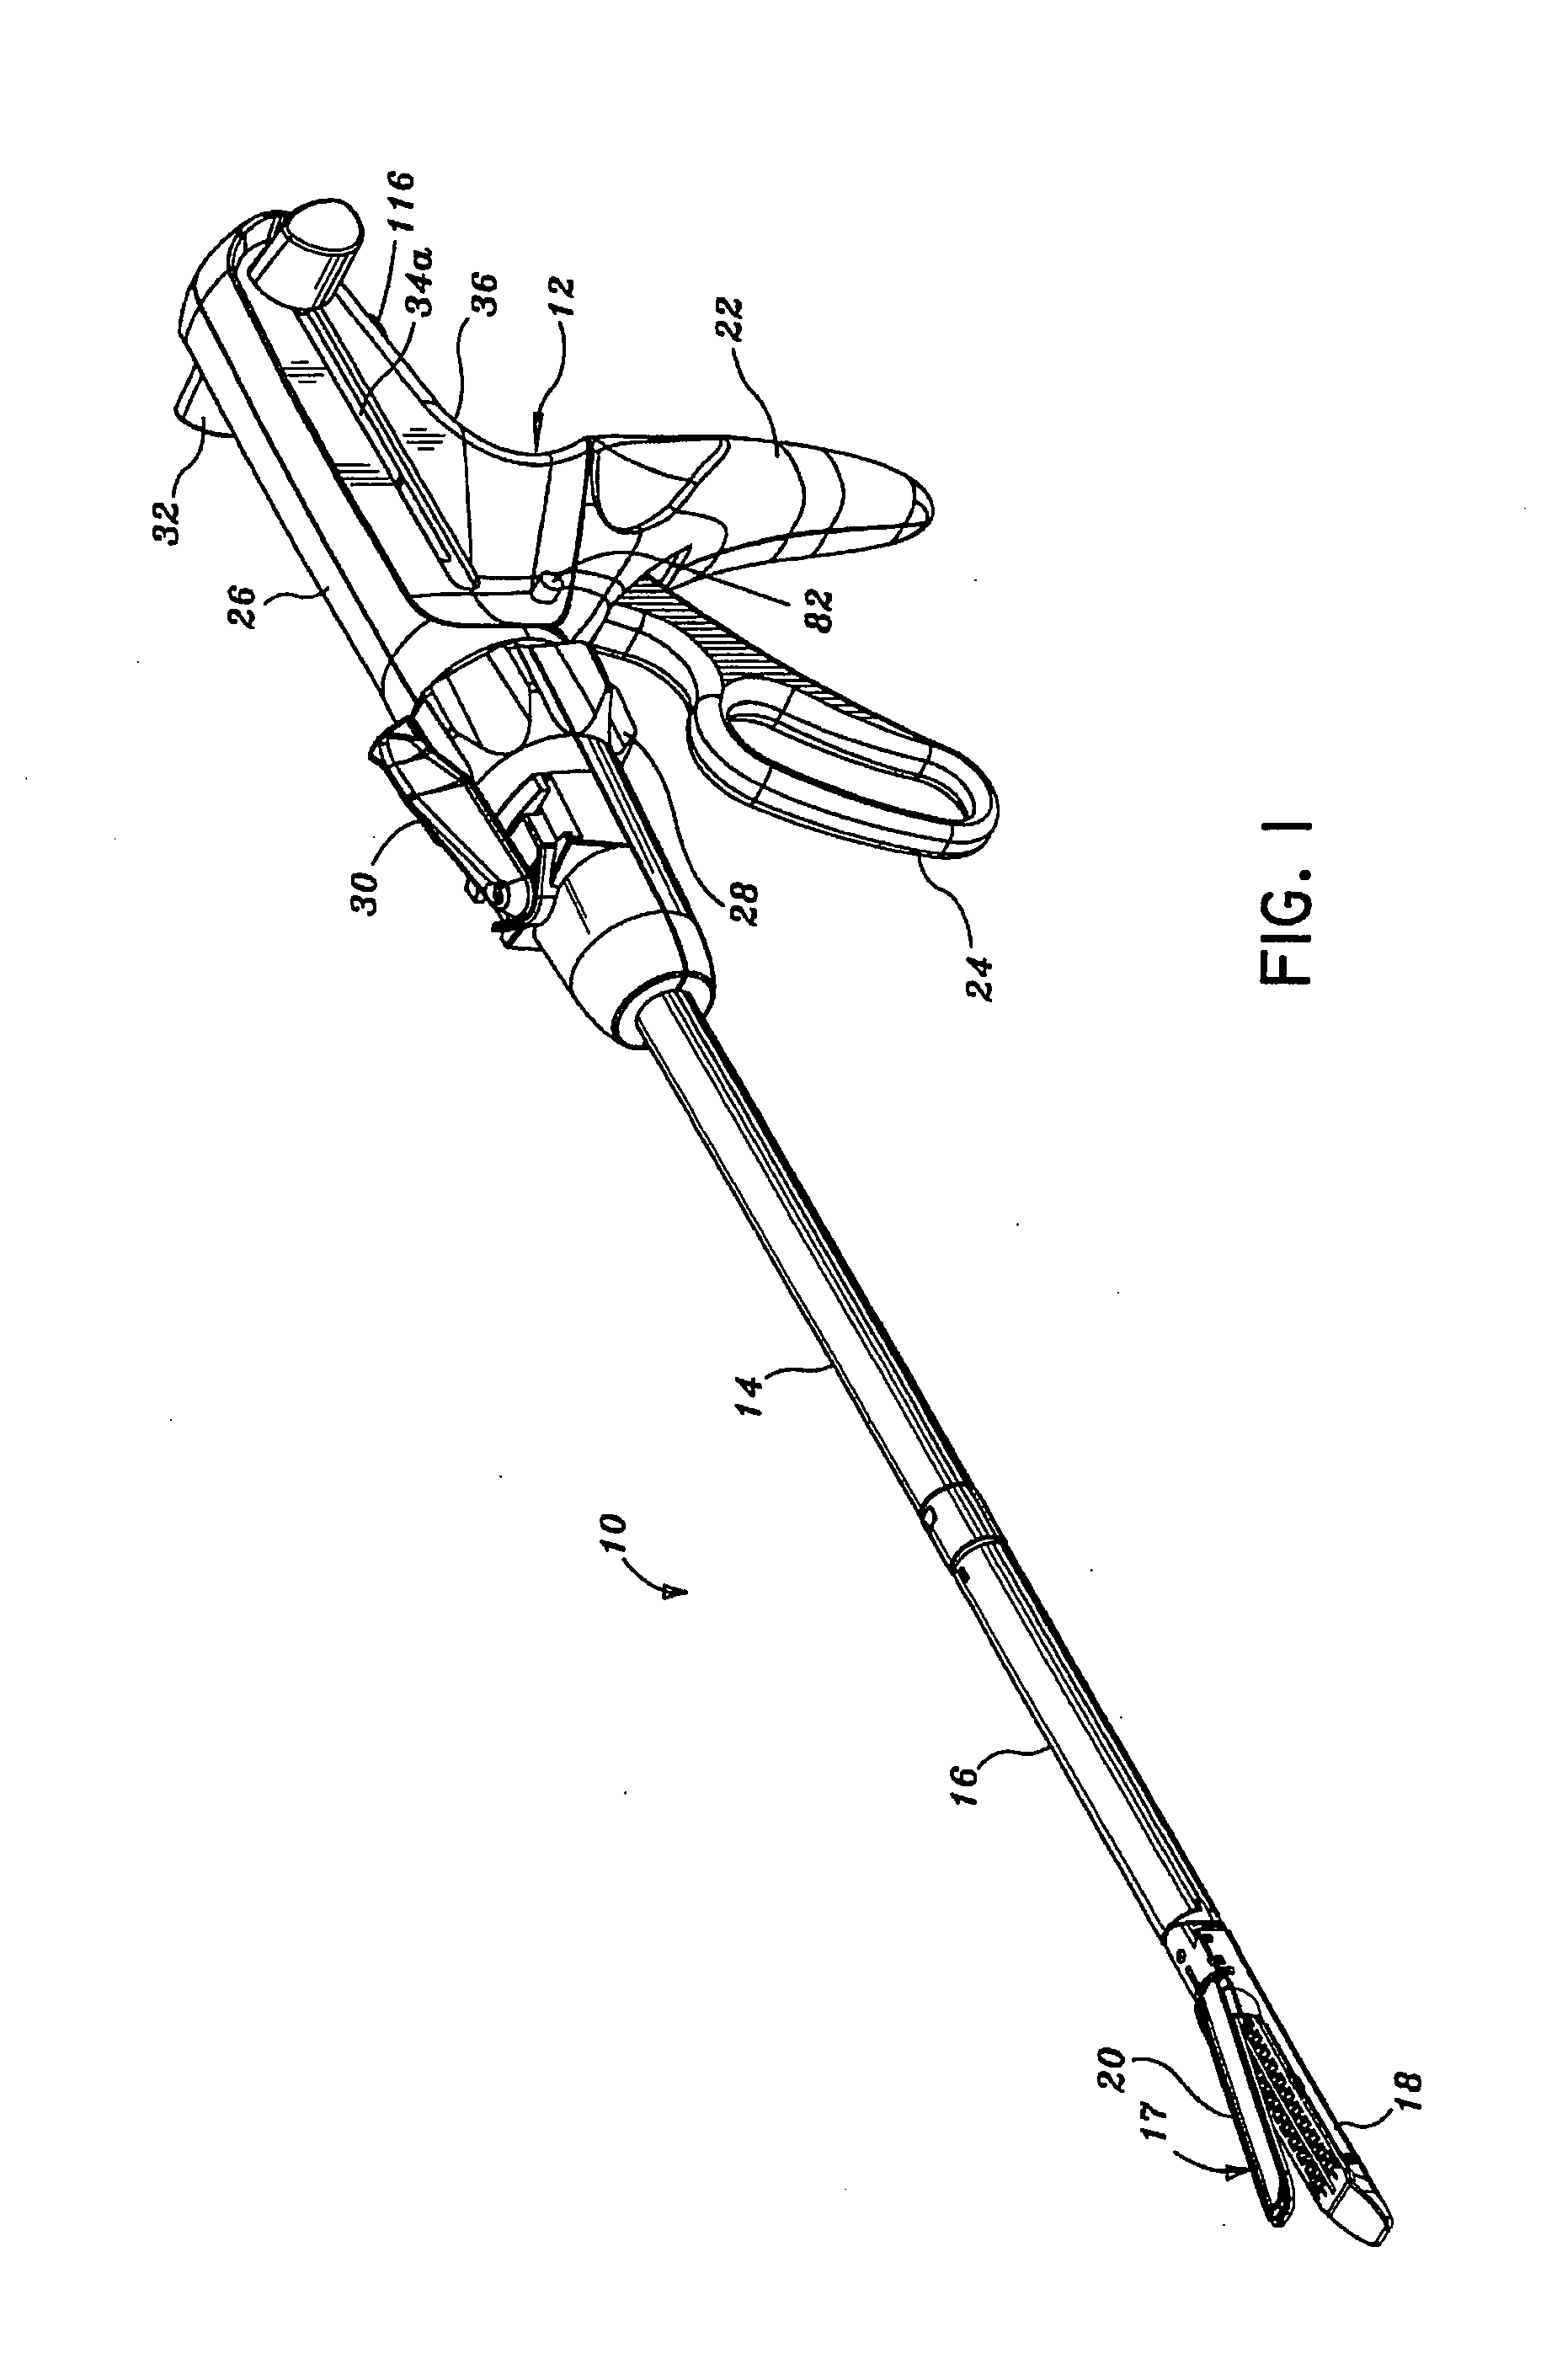 Closure systems for a surgical cutting and stapling instrument